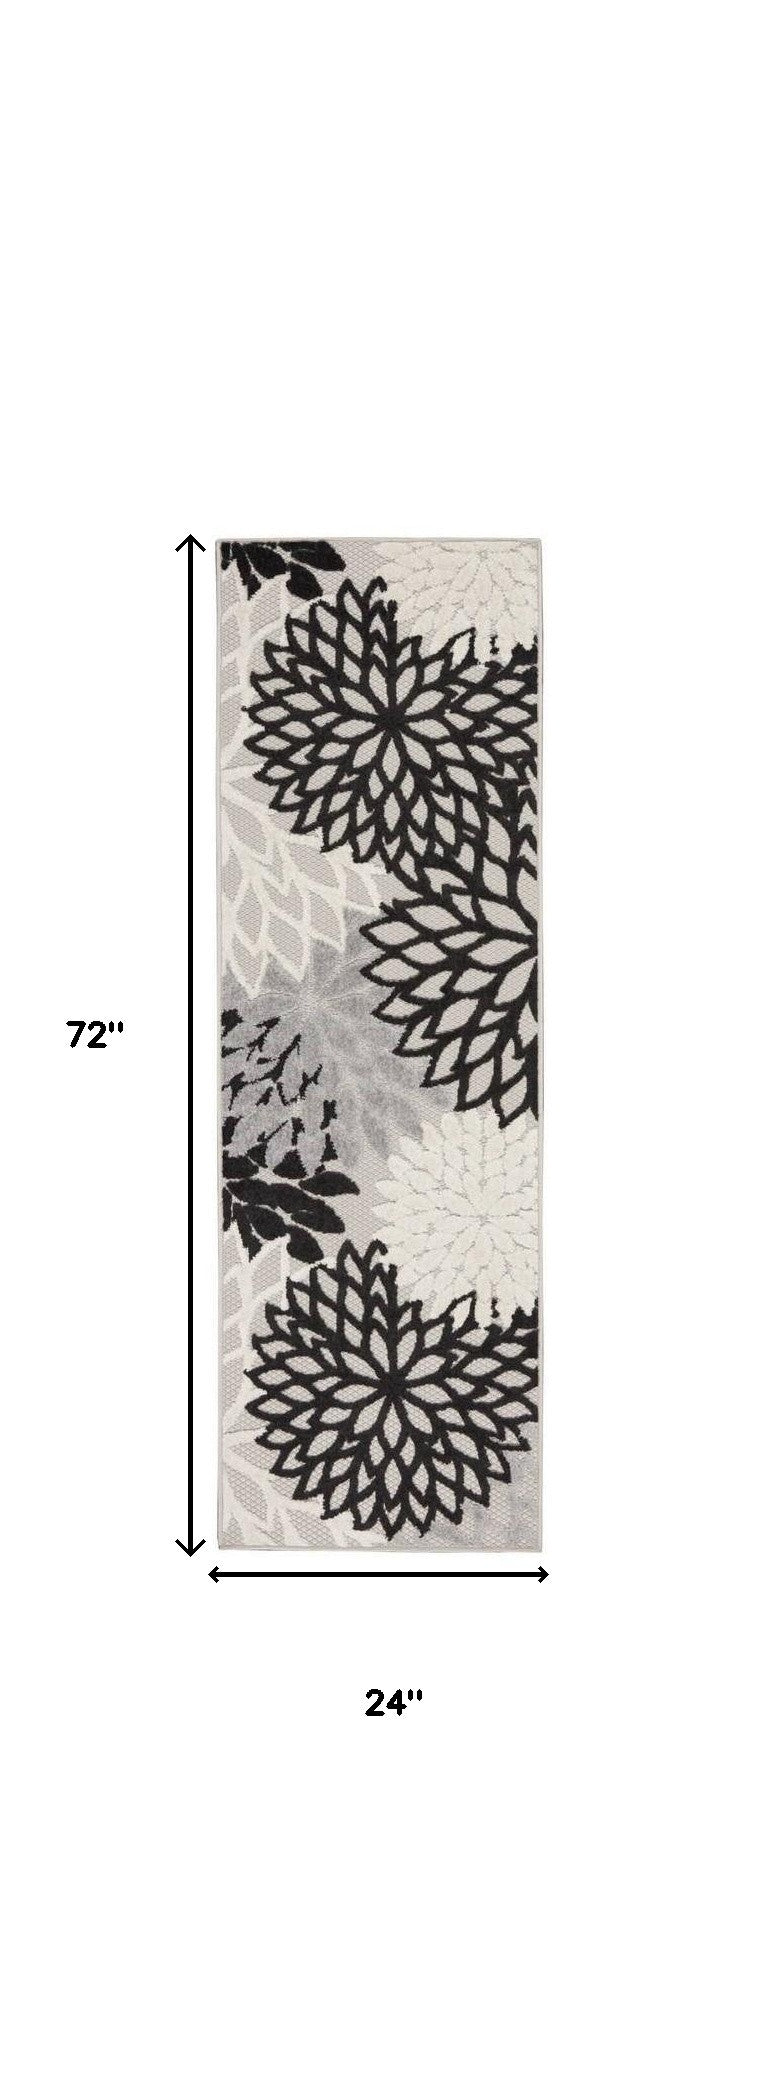 2' X 6' Black And White Floral Non Skid Indoor Outdoor Runner Rug